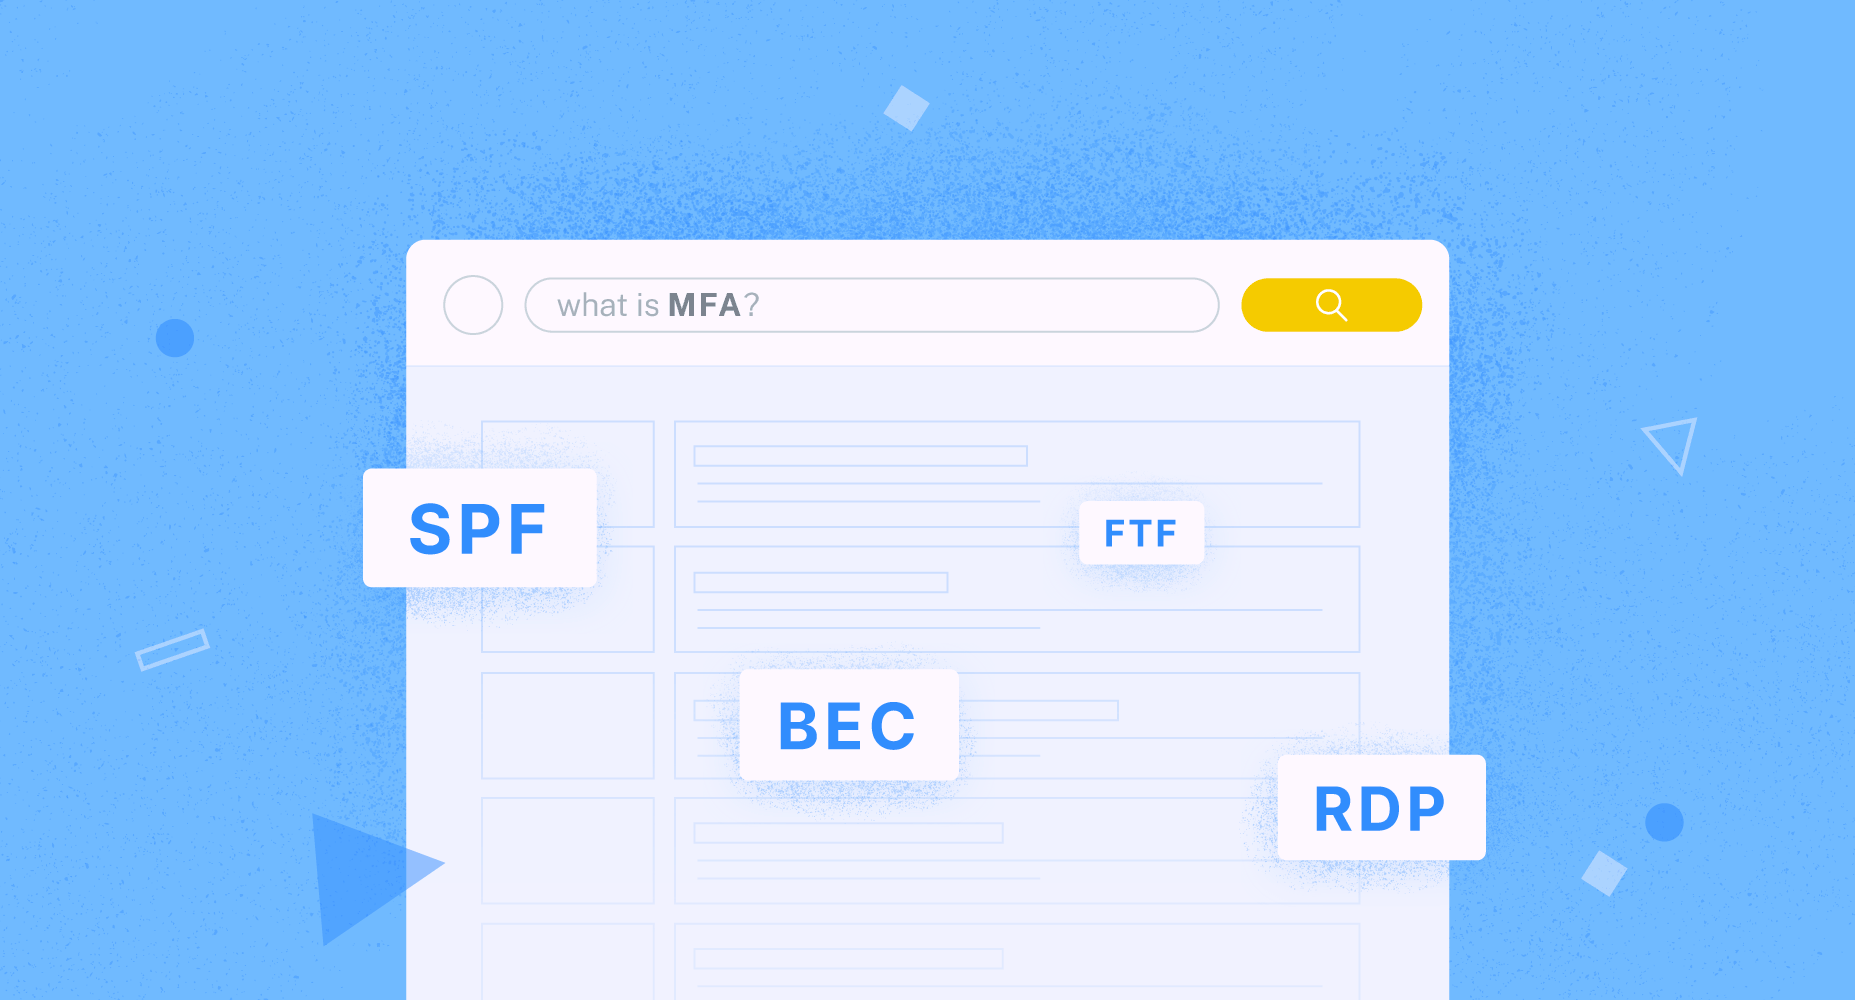 Featured Image for Cybersecurity alphabet soup: FTF, RDP, MFA (2FA), BEC, and SPF